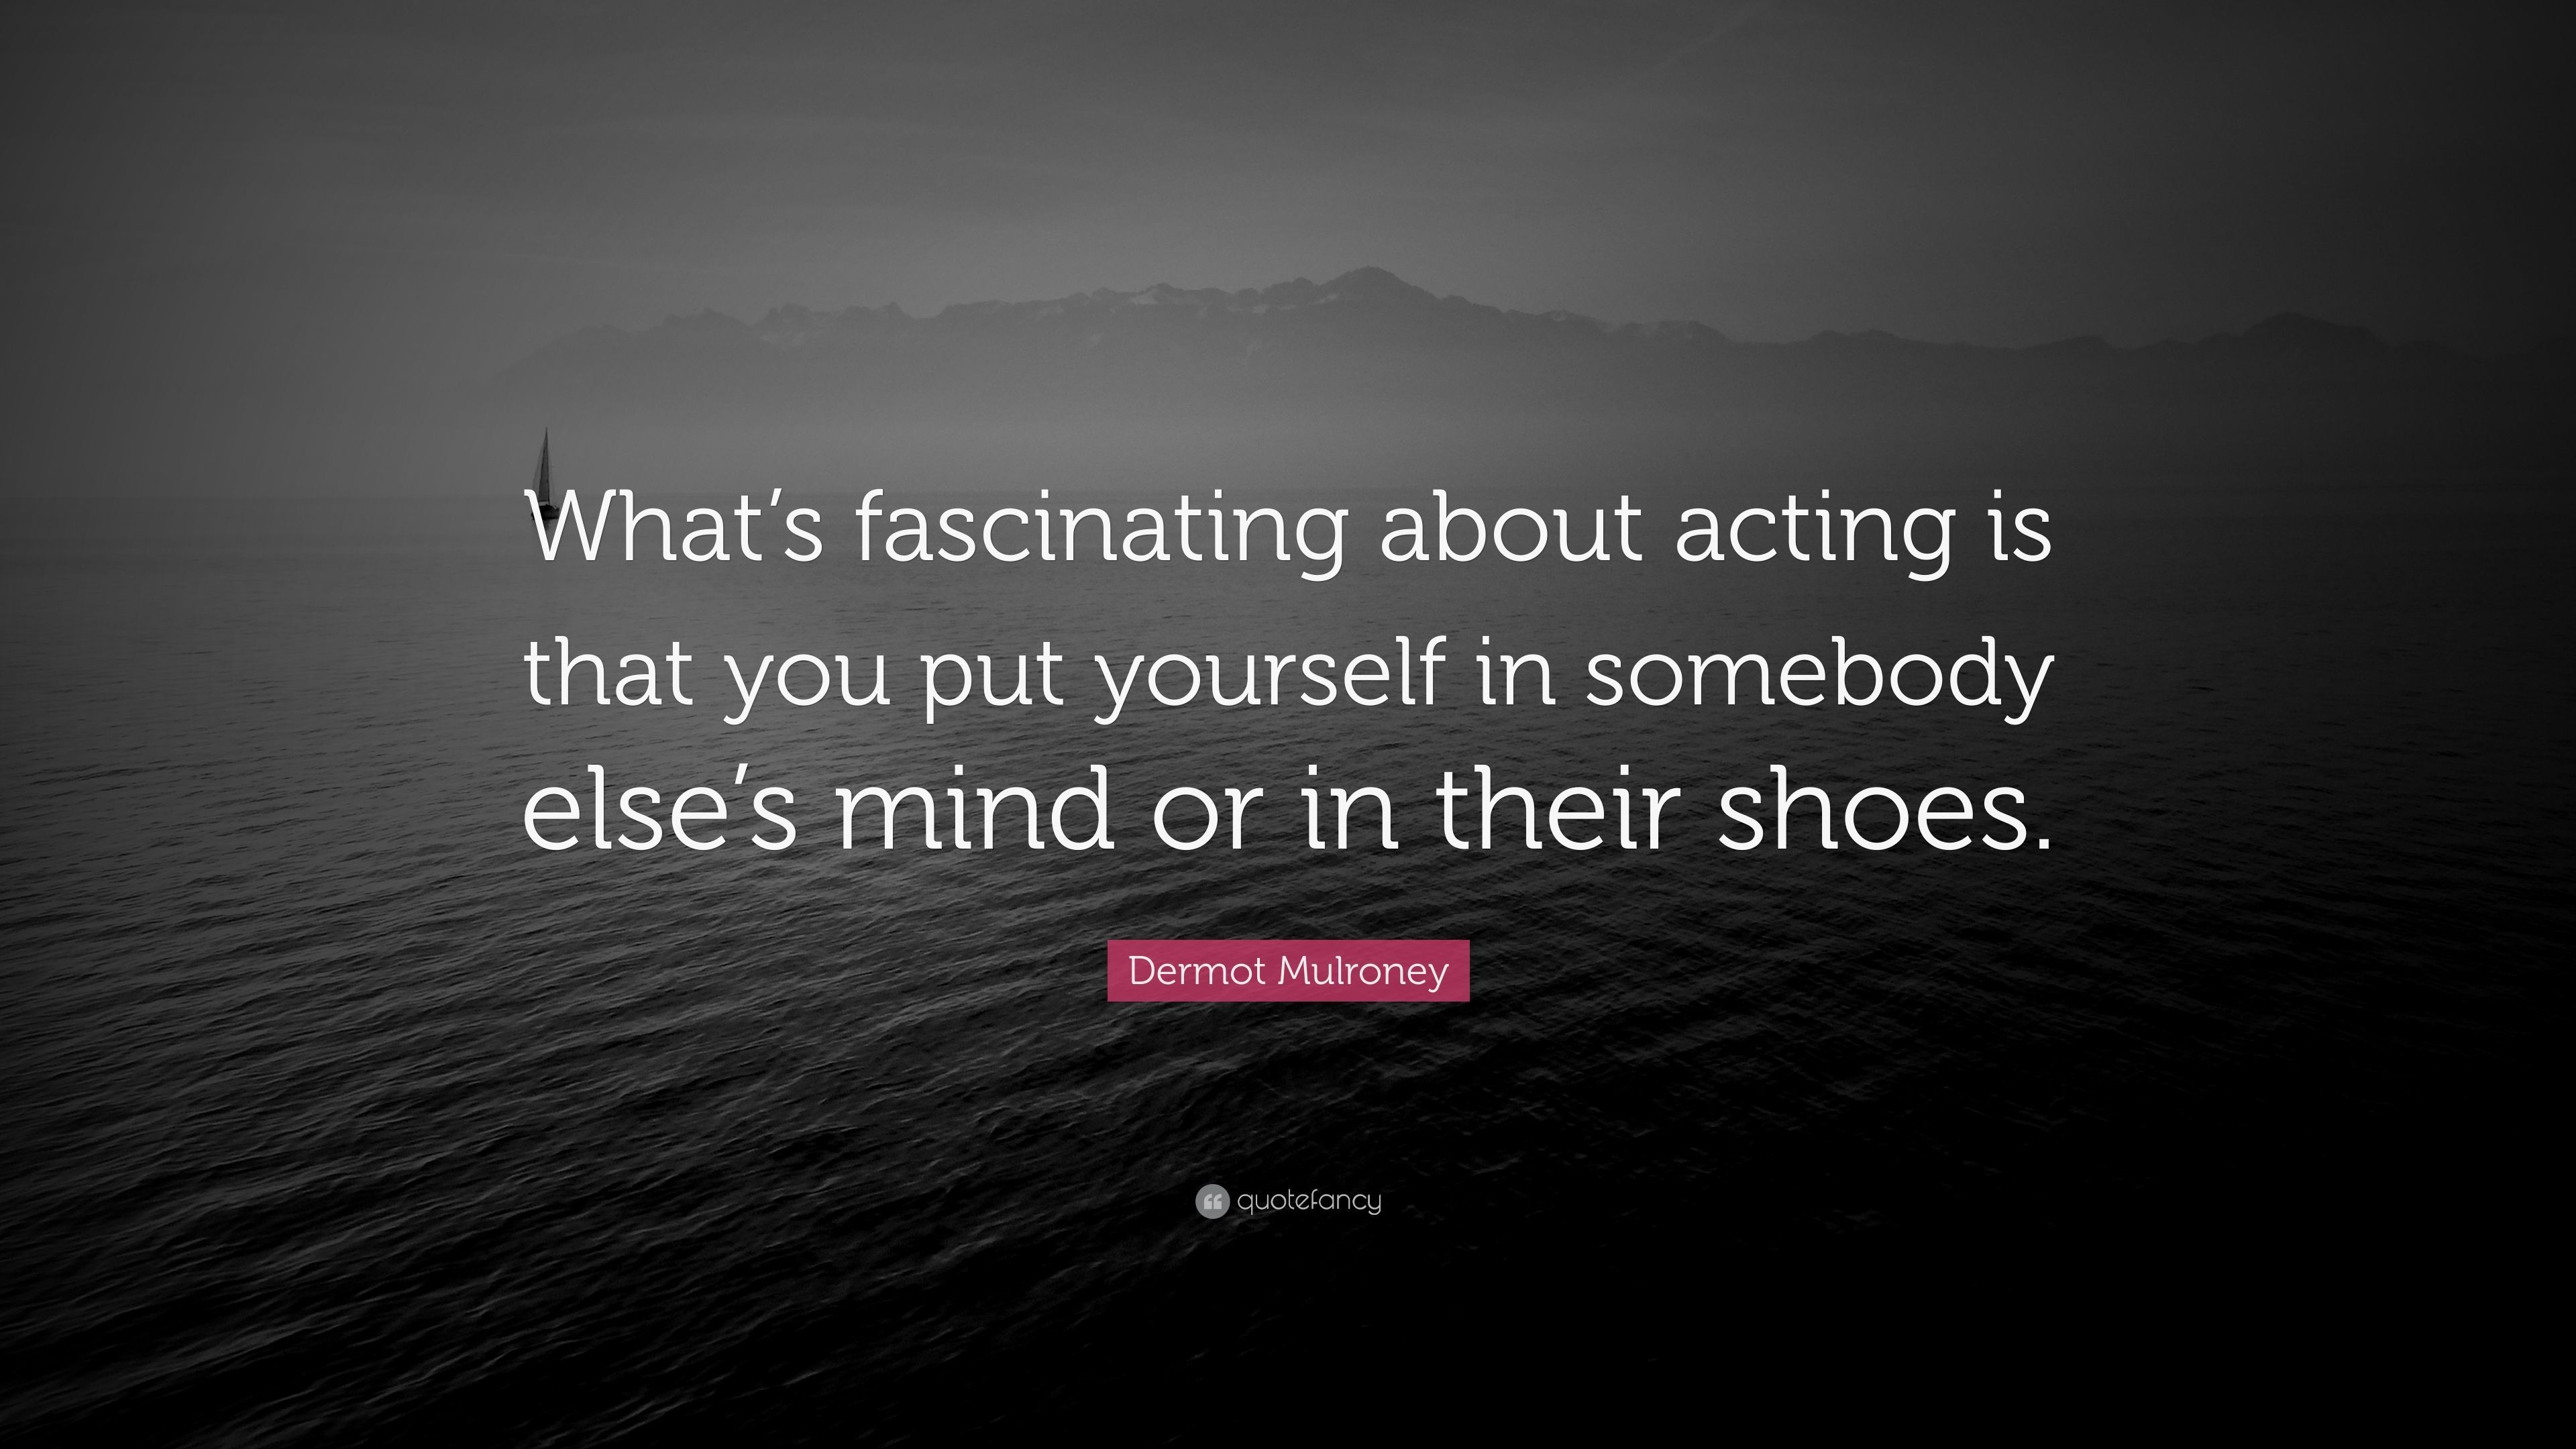 Dermot Mulroney Quote: “What's fascinating about acting is that